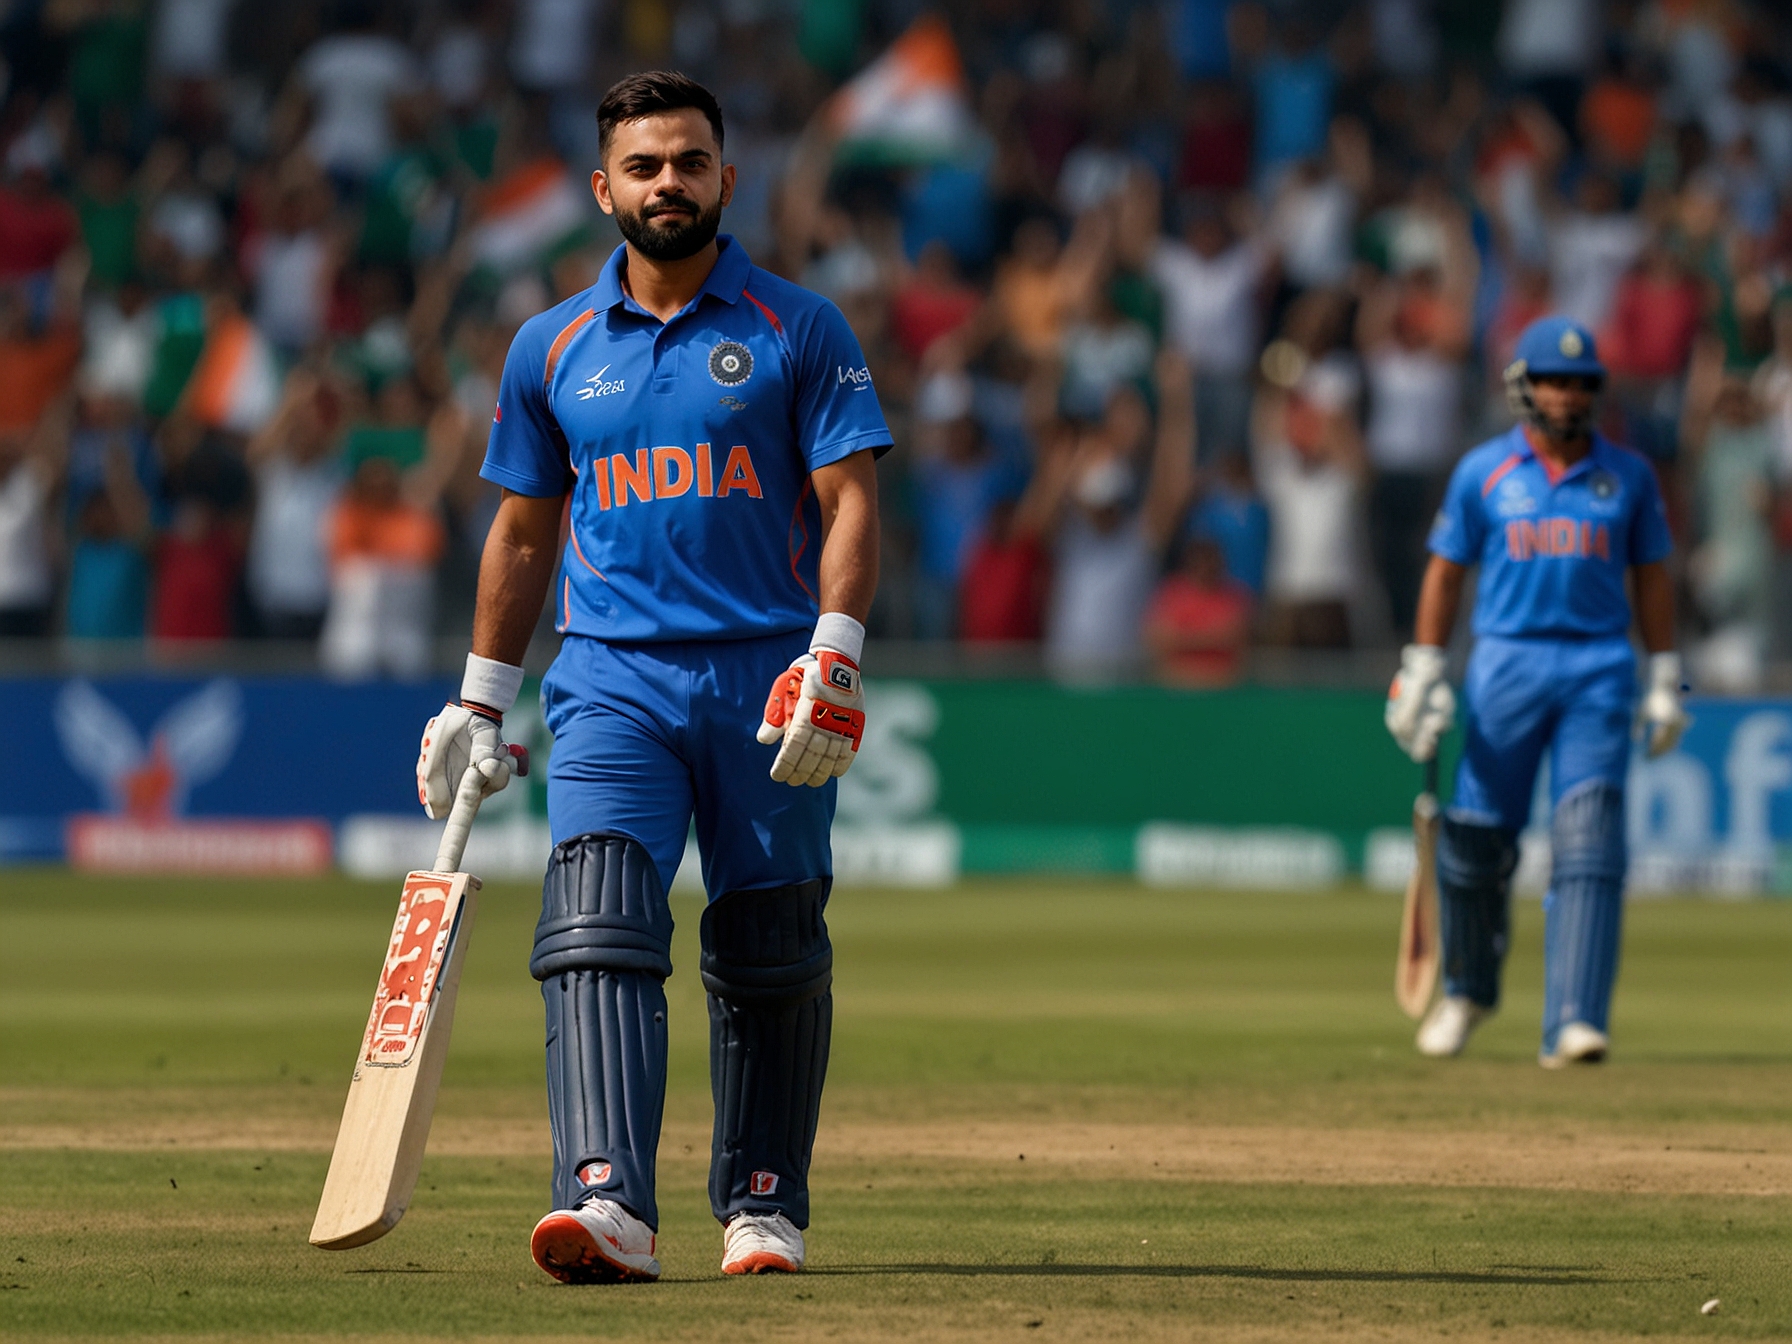 Virat Kohli walks back to the pavilion gracefully after his dismissal, amidst ecstatic celebrations by Bangladeshi fans. This image reflects the sportsmanship and the emotional highs of the India vs Bangladesh match.